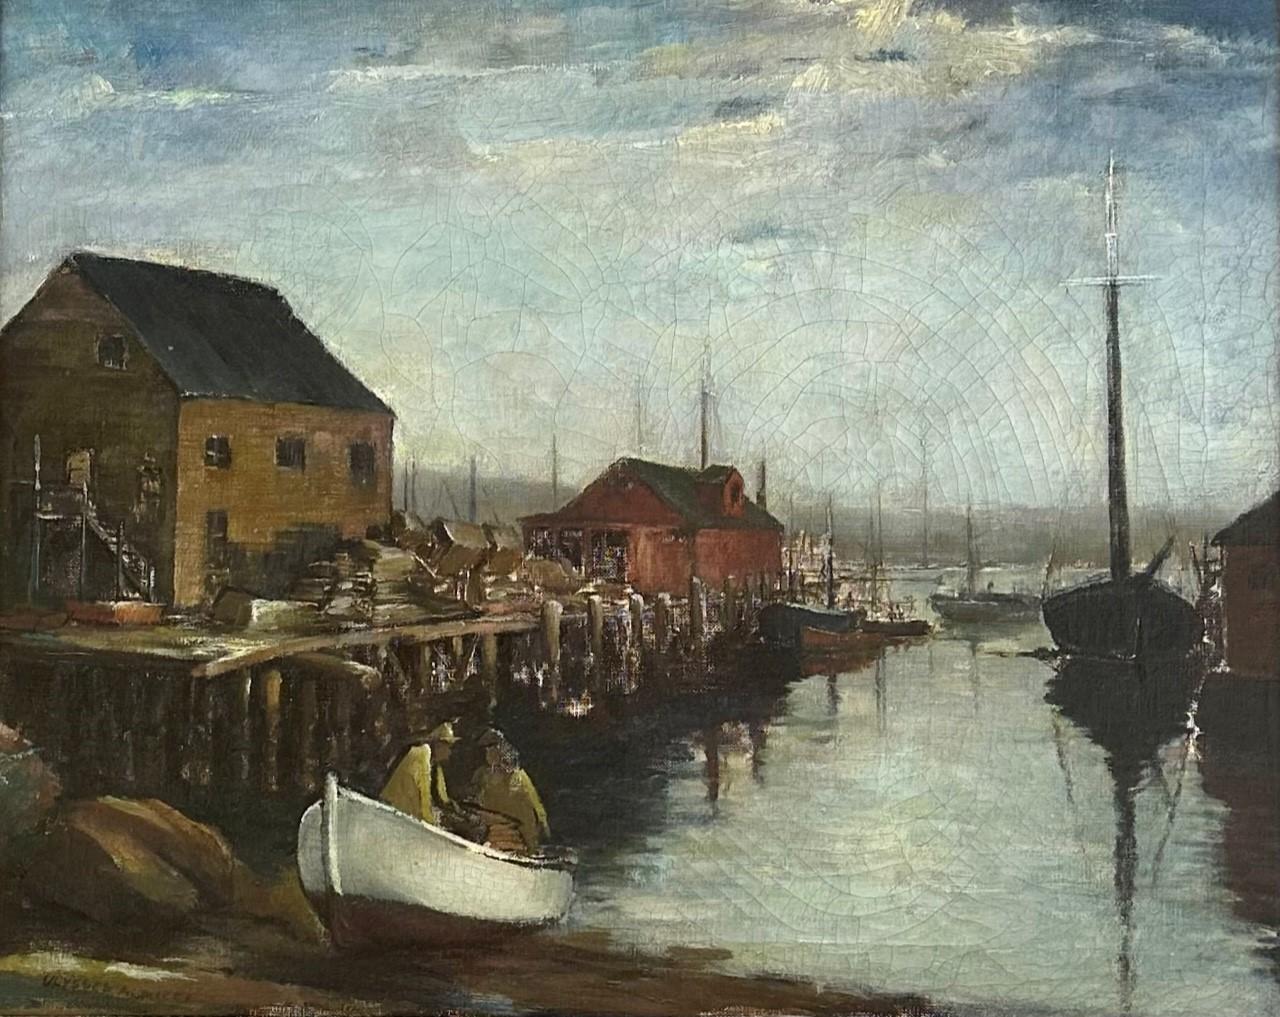 American Salmagundi Club Oil Painting “Lobstermen” by Ulysses Ricci.

Beautiful oil painting on canvas of the Rockport Massachusetts iconic Fish Pier. It is painted by the N.Y. Salmagundi Club member, Ulysses Ricci (1888-1960). He is one of the